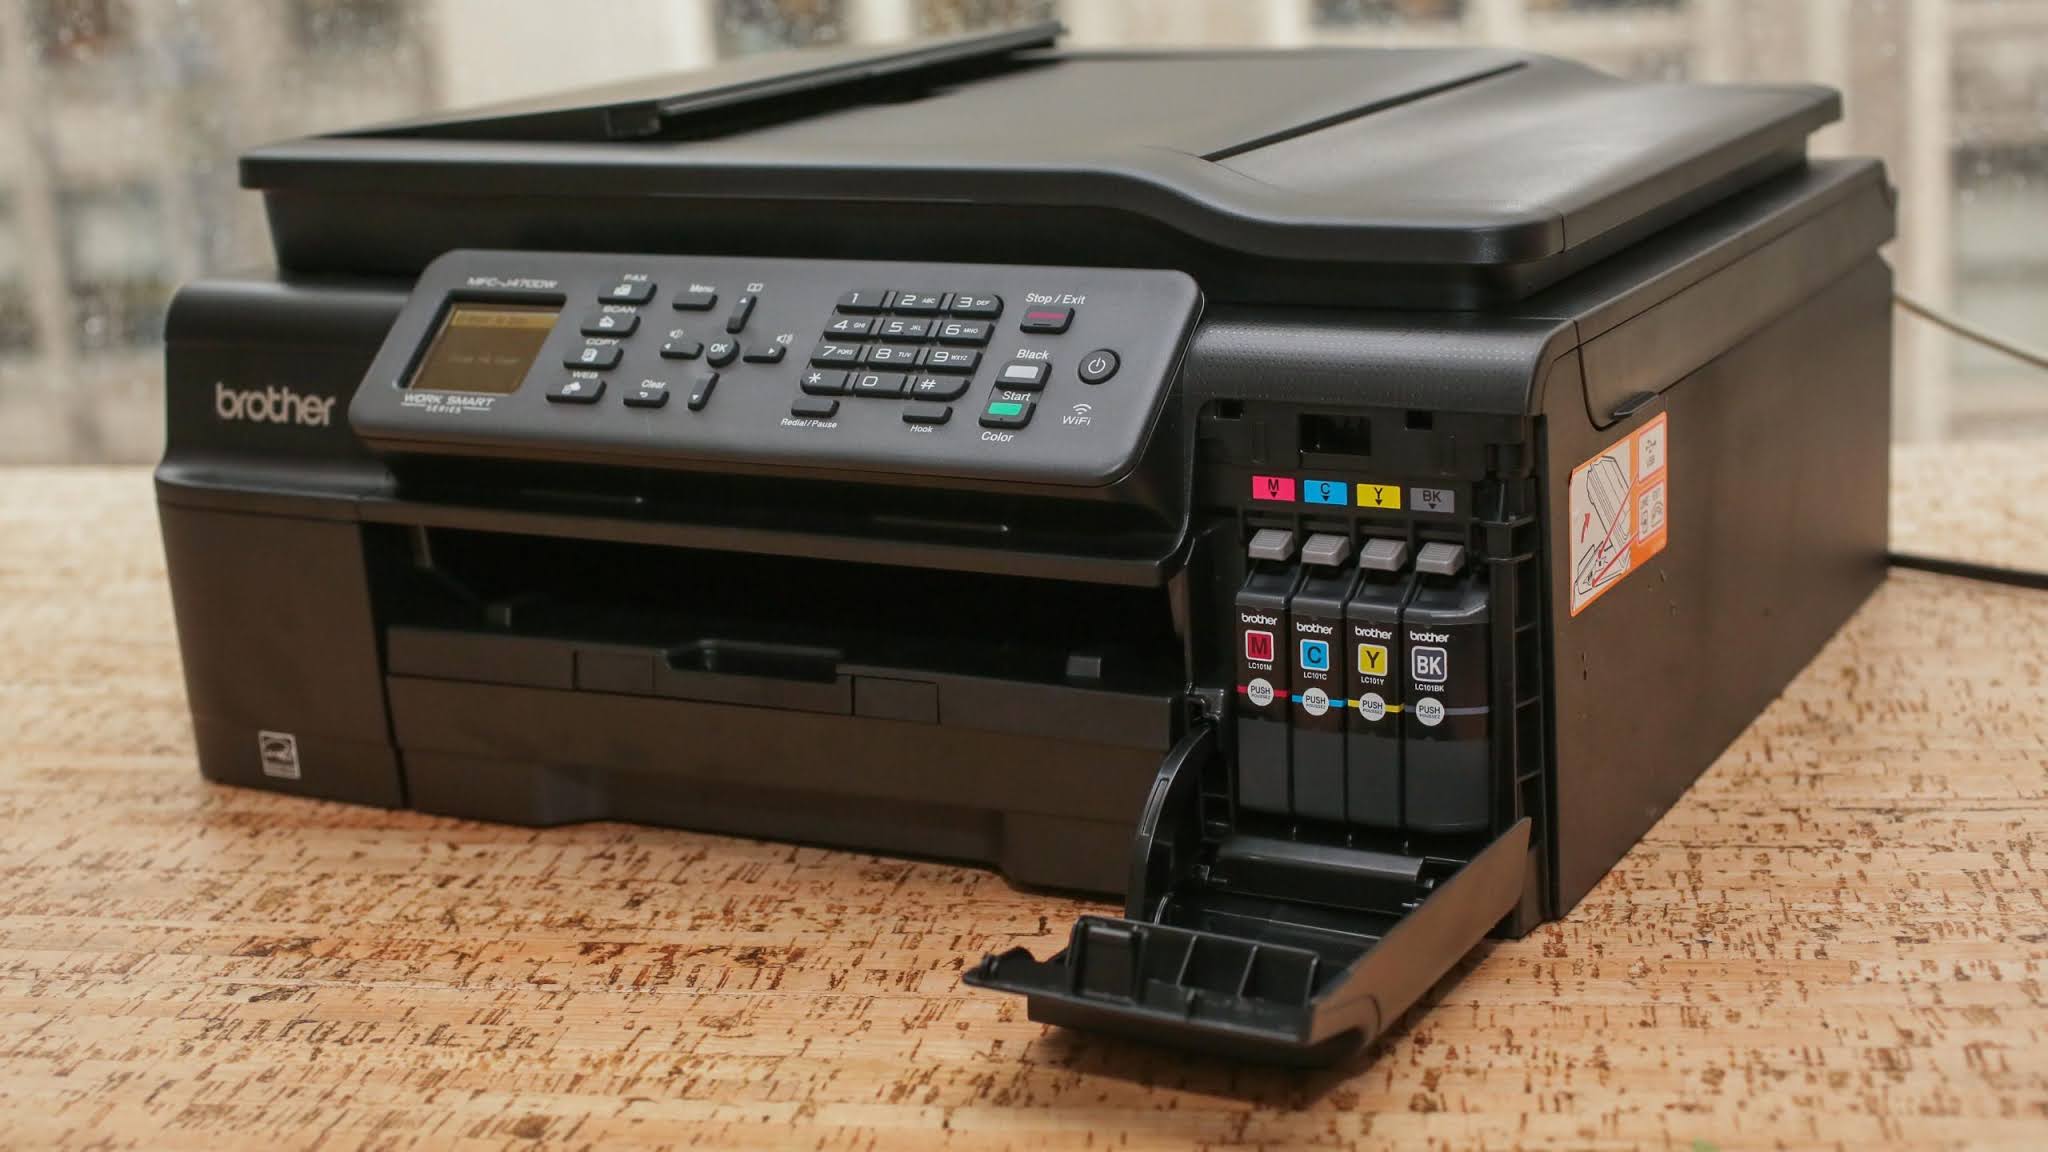 HOW TO FIX BROTHER PRINTER PRINTING PROBLEMS?